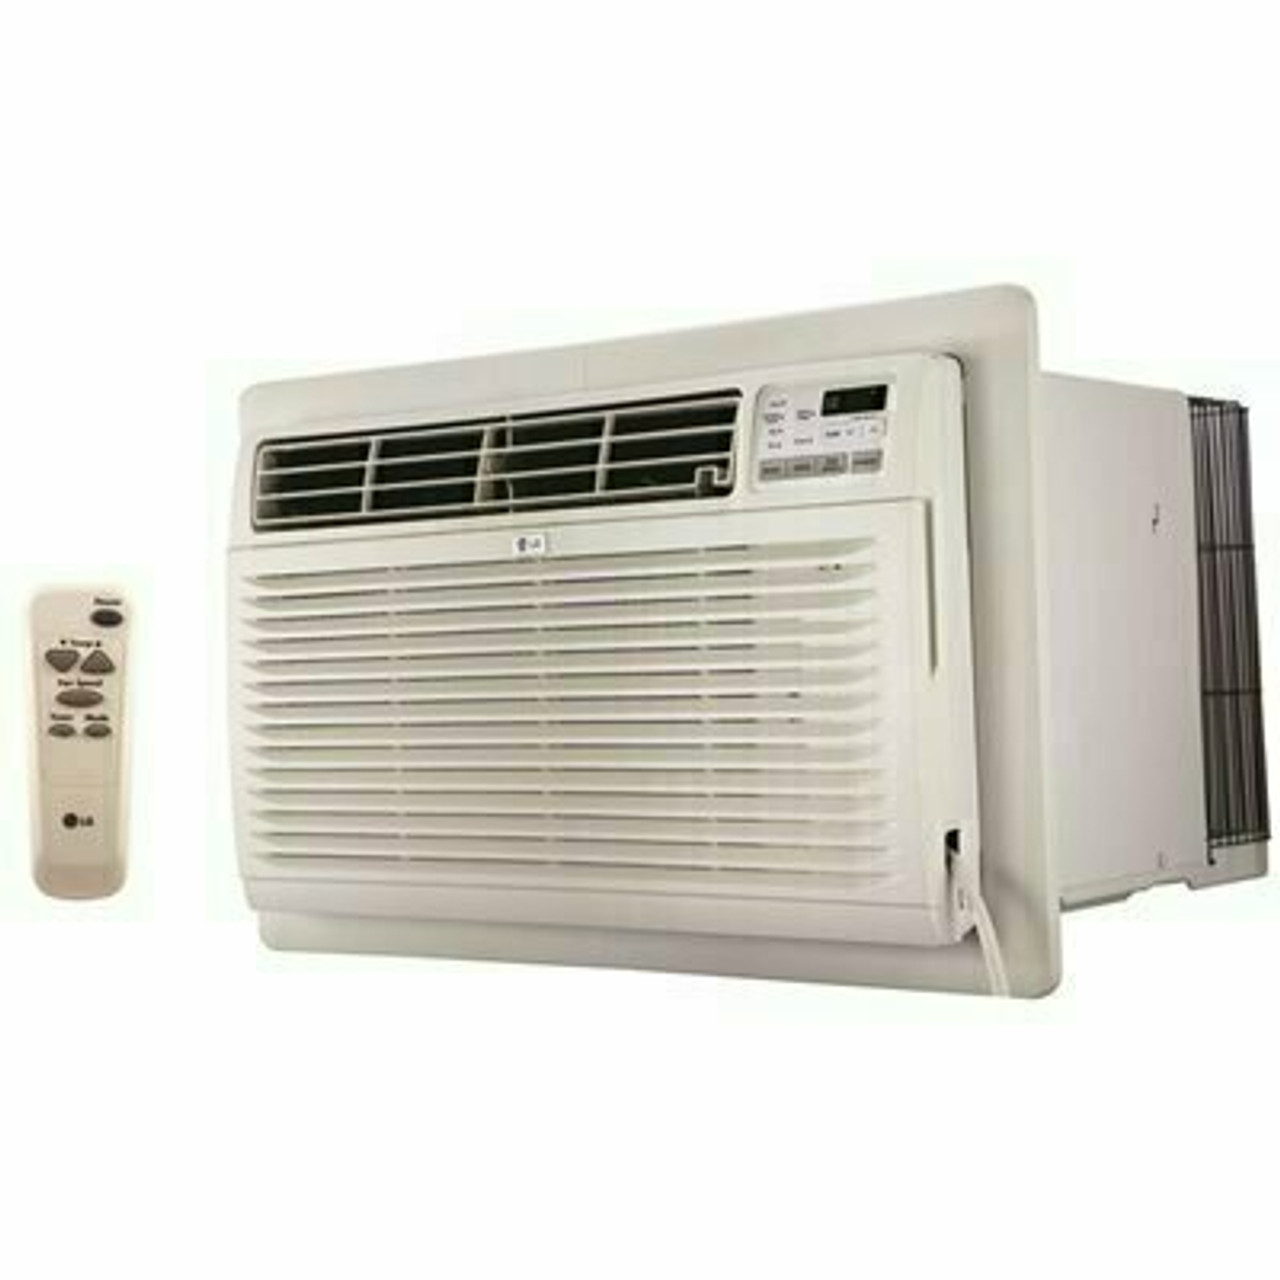 Lg Electronics 11,200 Btu 230-Volt Through-The-Wall Air Conditioner Lt1237Hnr With Heat And Remote In White